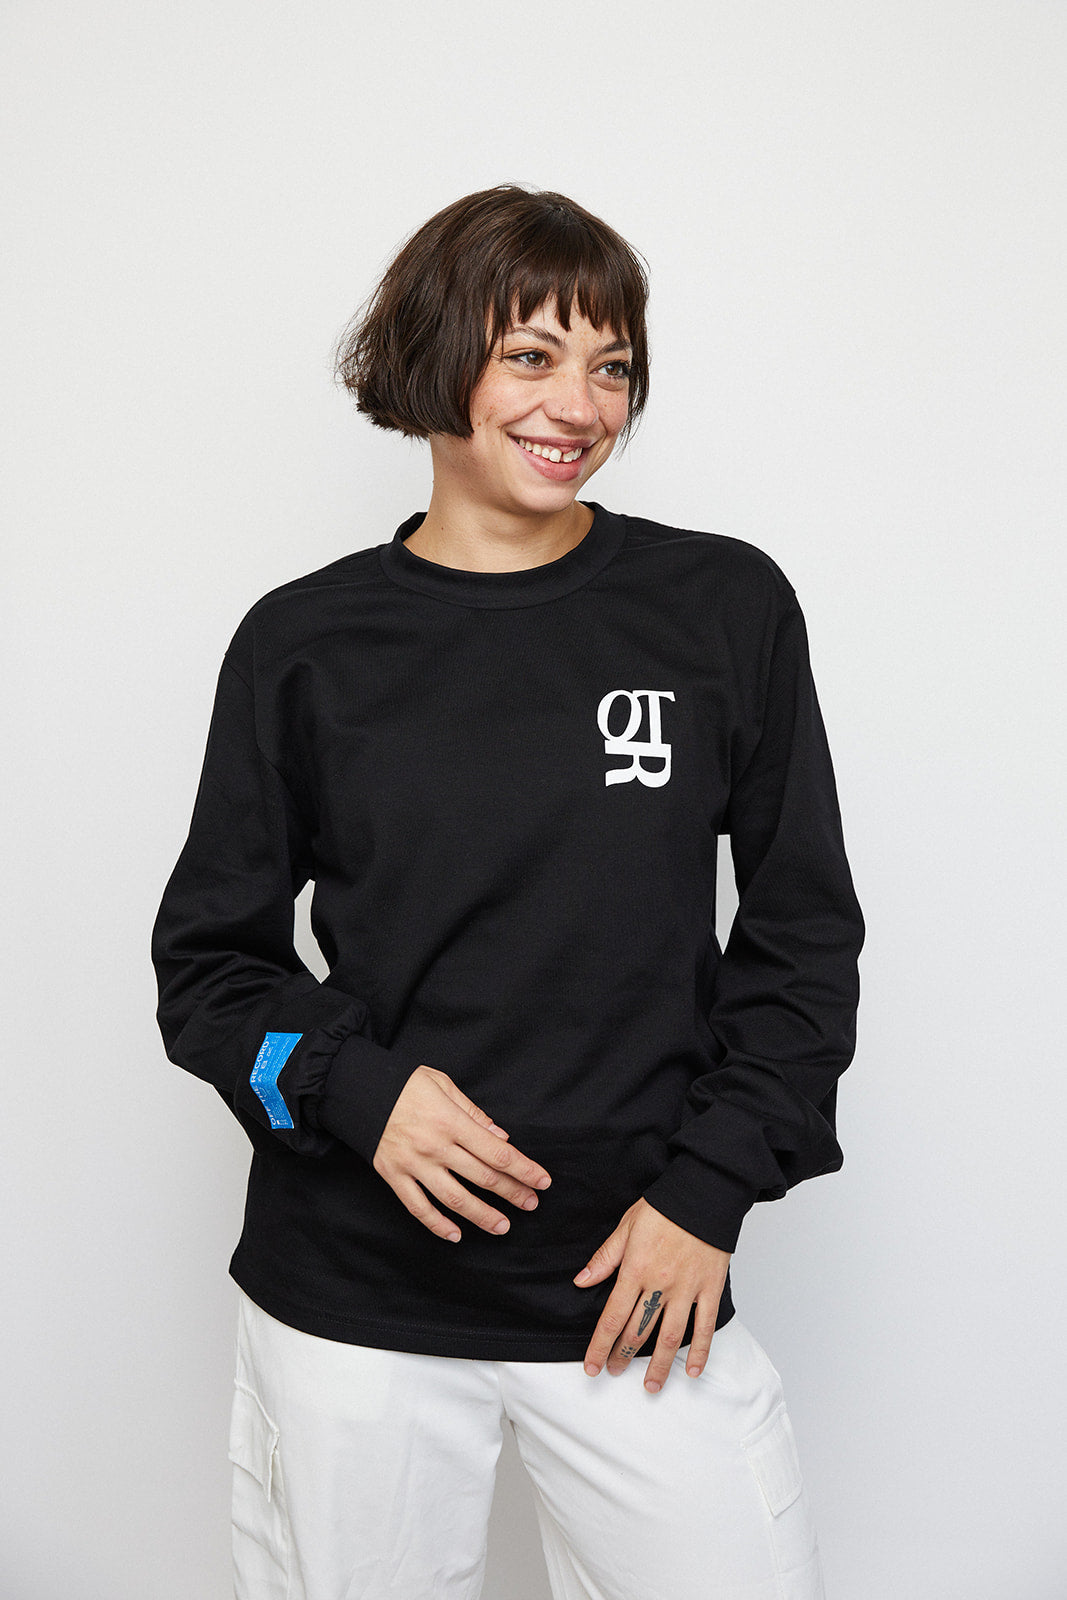 Female model Danielle wearing the "CHANGE YOUR MIND" T-Shirt in unisex size Small and the color black. Danielle is facing the camera, smiling. There is an OTR logo on the chest and a blue woven tag on the right arm, just near the cuff.